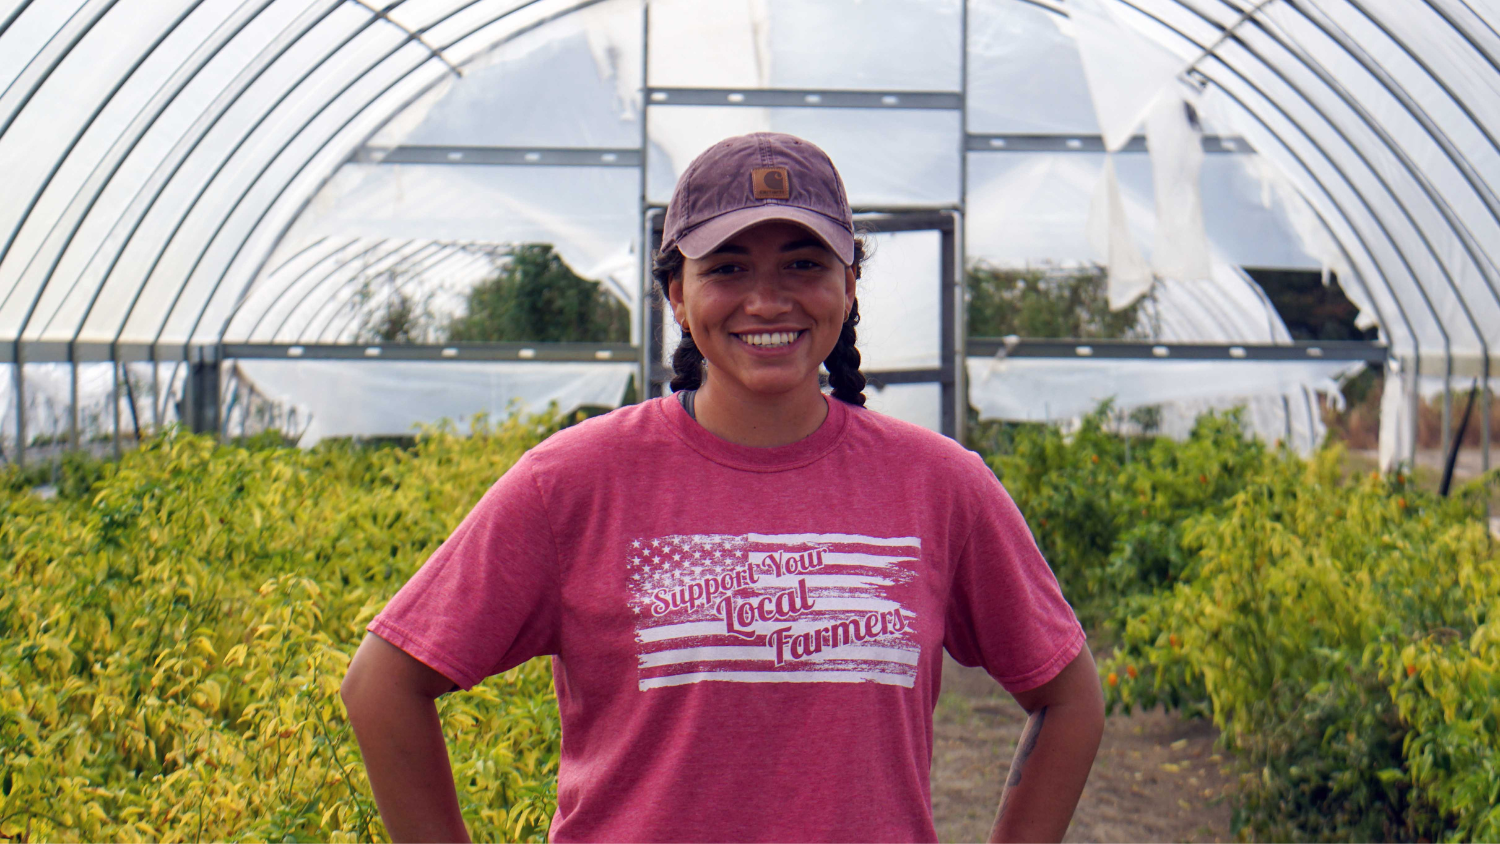 Marlena Chieffo standing in a greenhouse wearing a shirt that says "Support your local farmers"